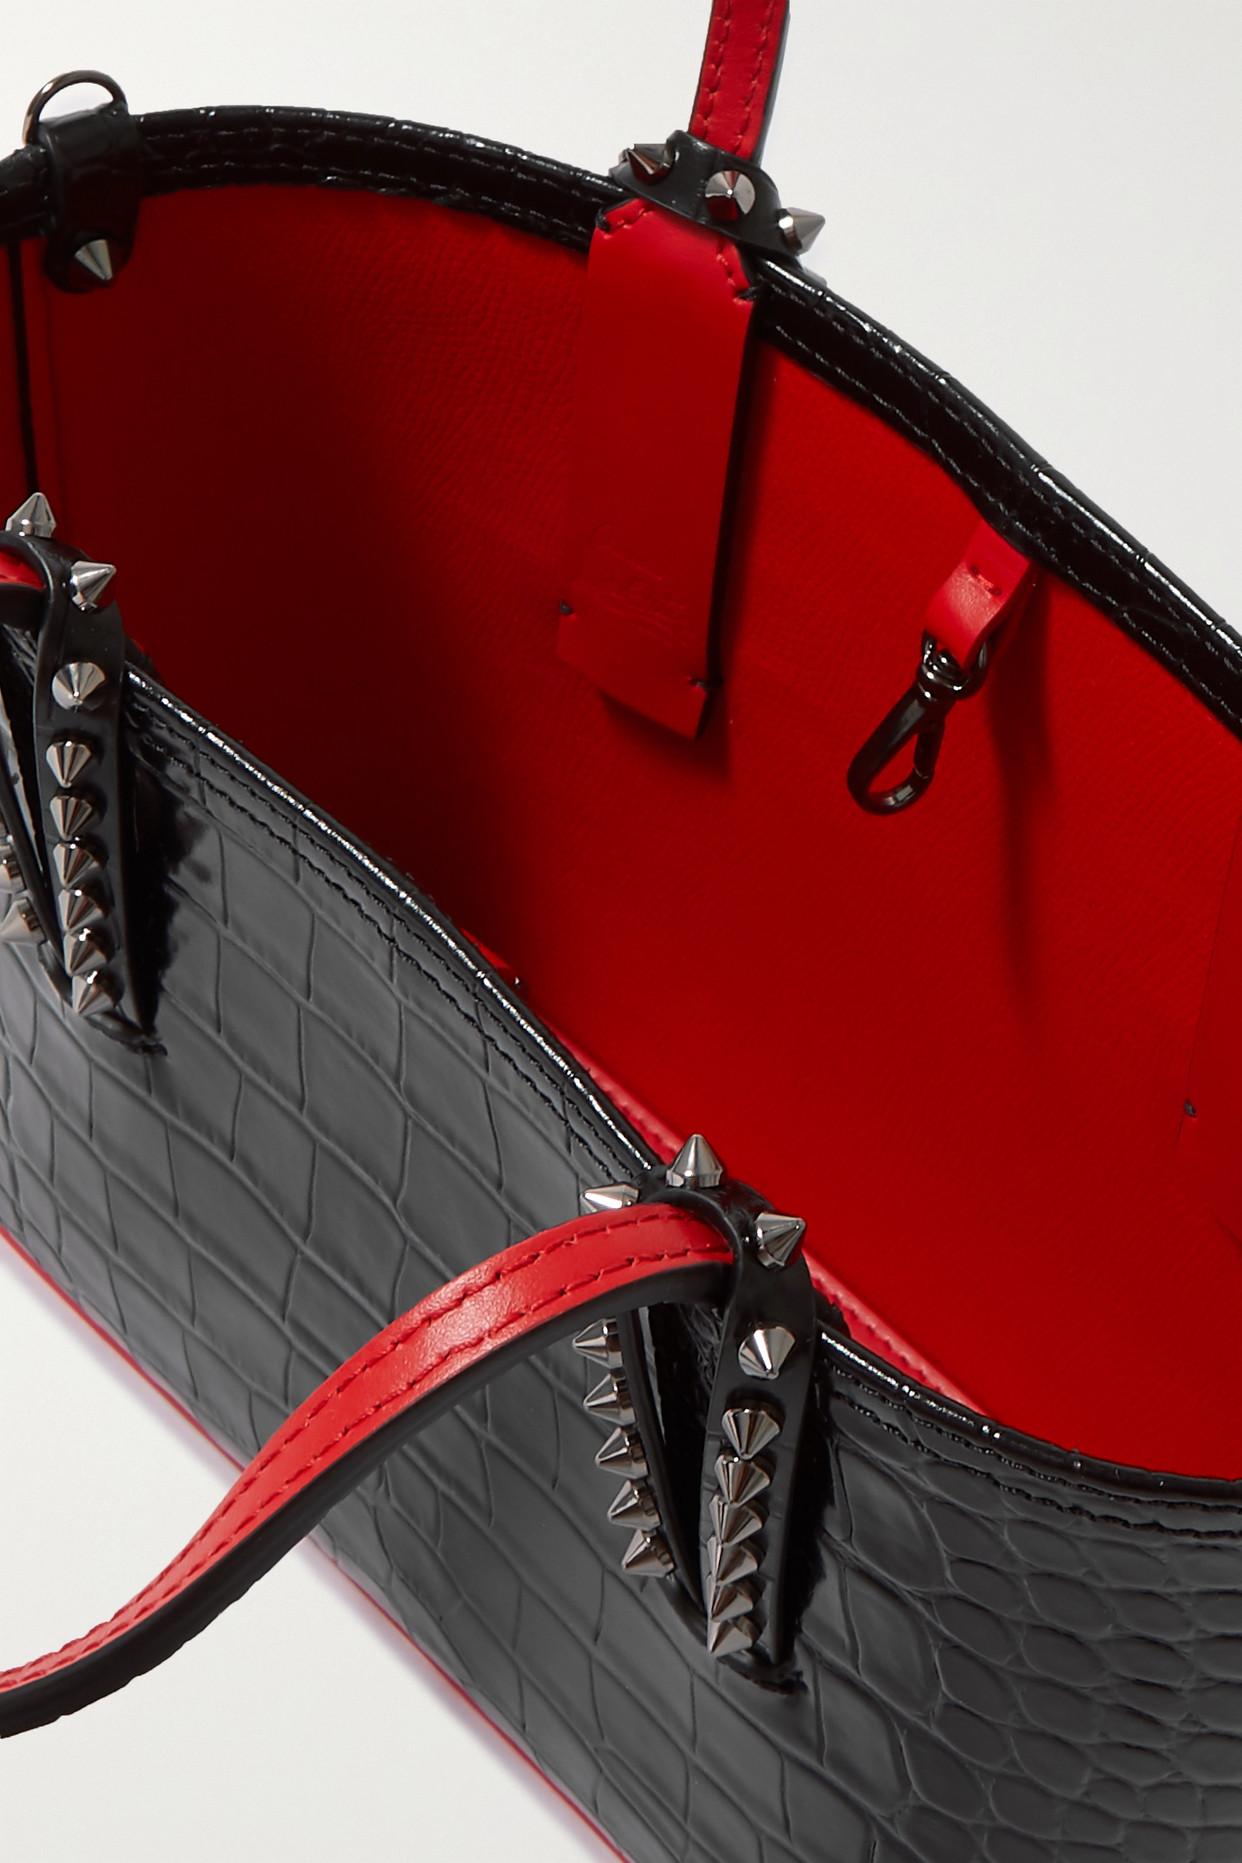 CHRISTIAN LOUBOUTIN Cabarock mini spiked textured-leather tote